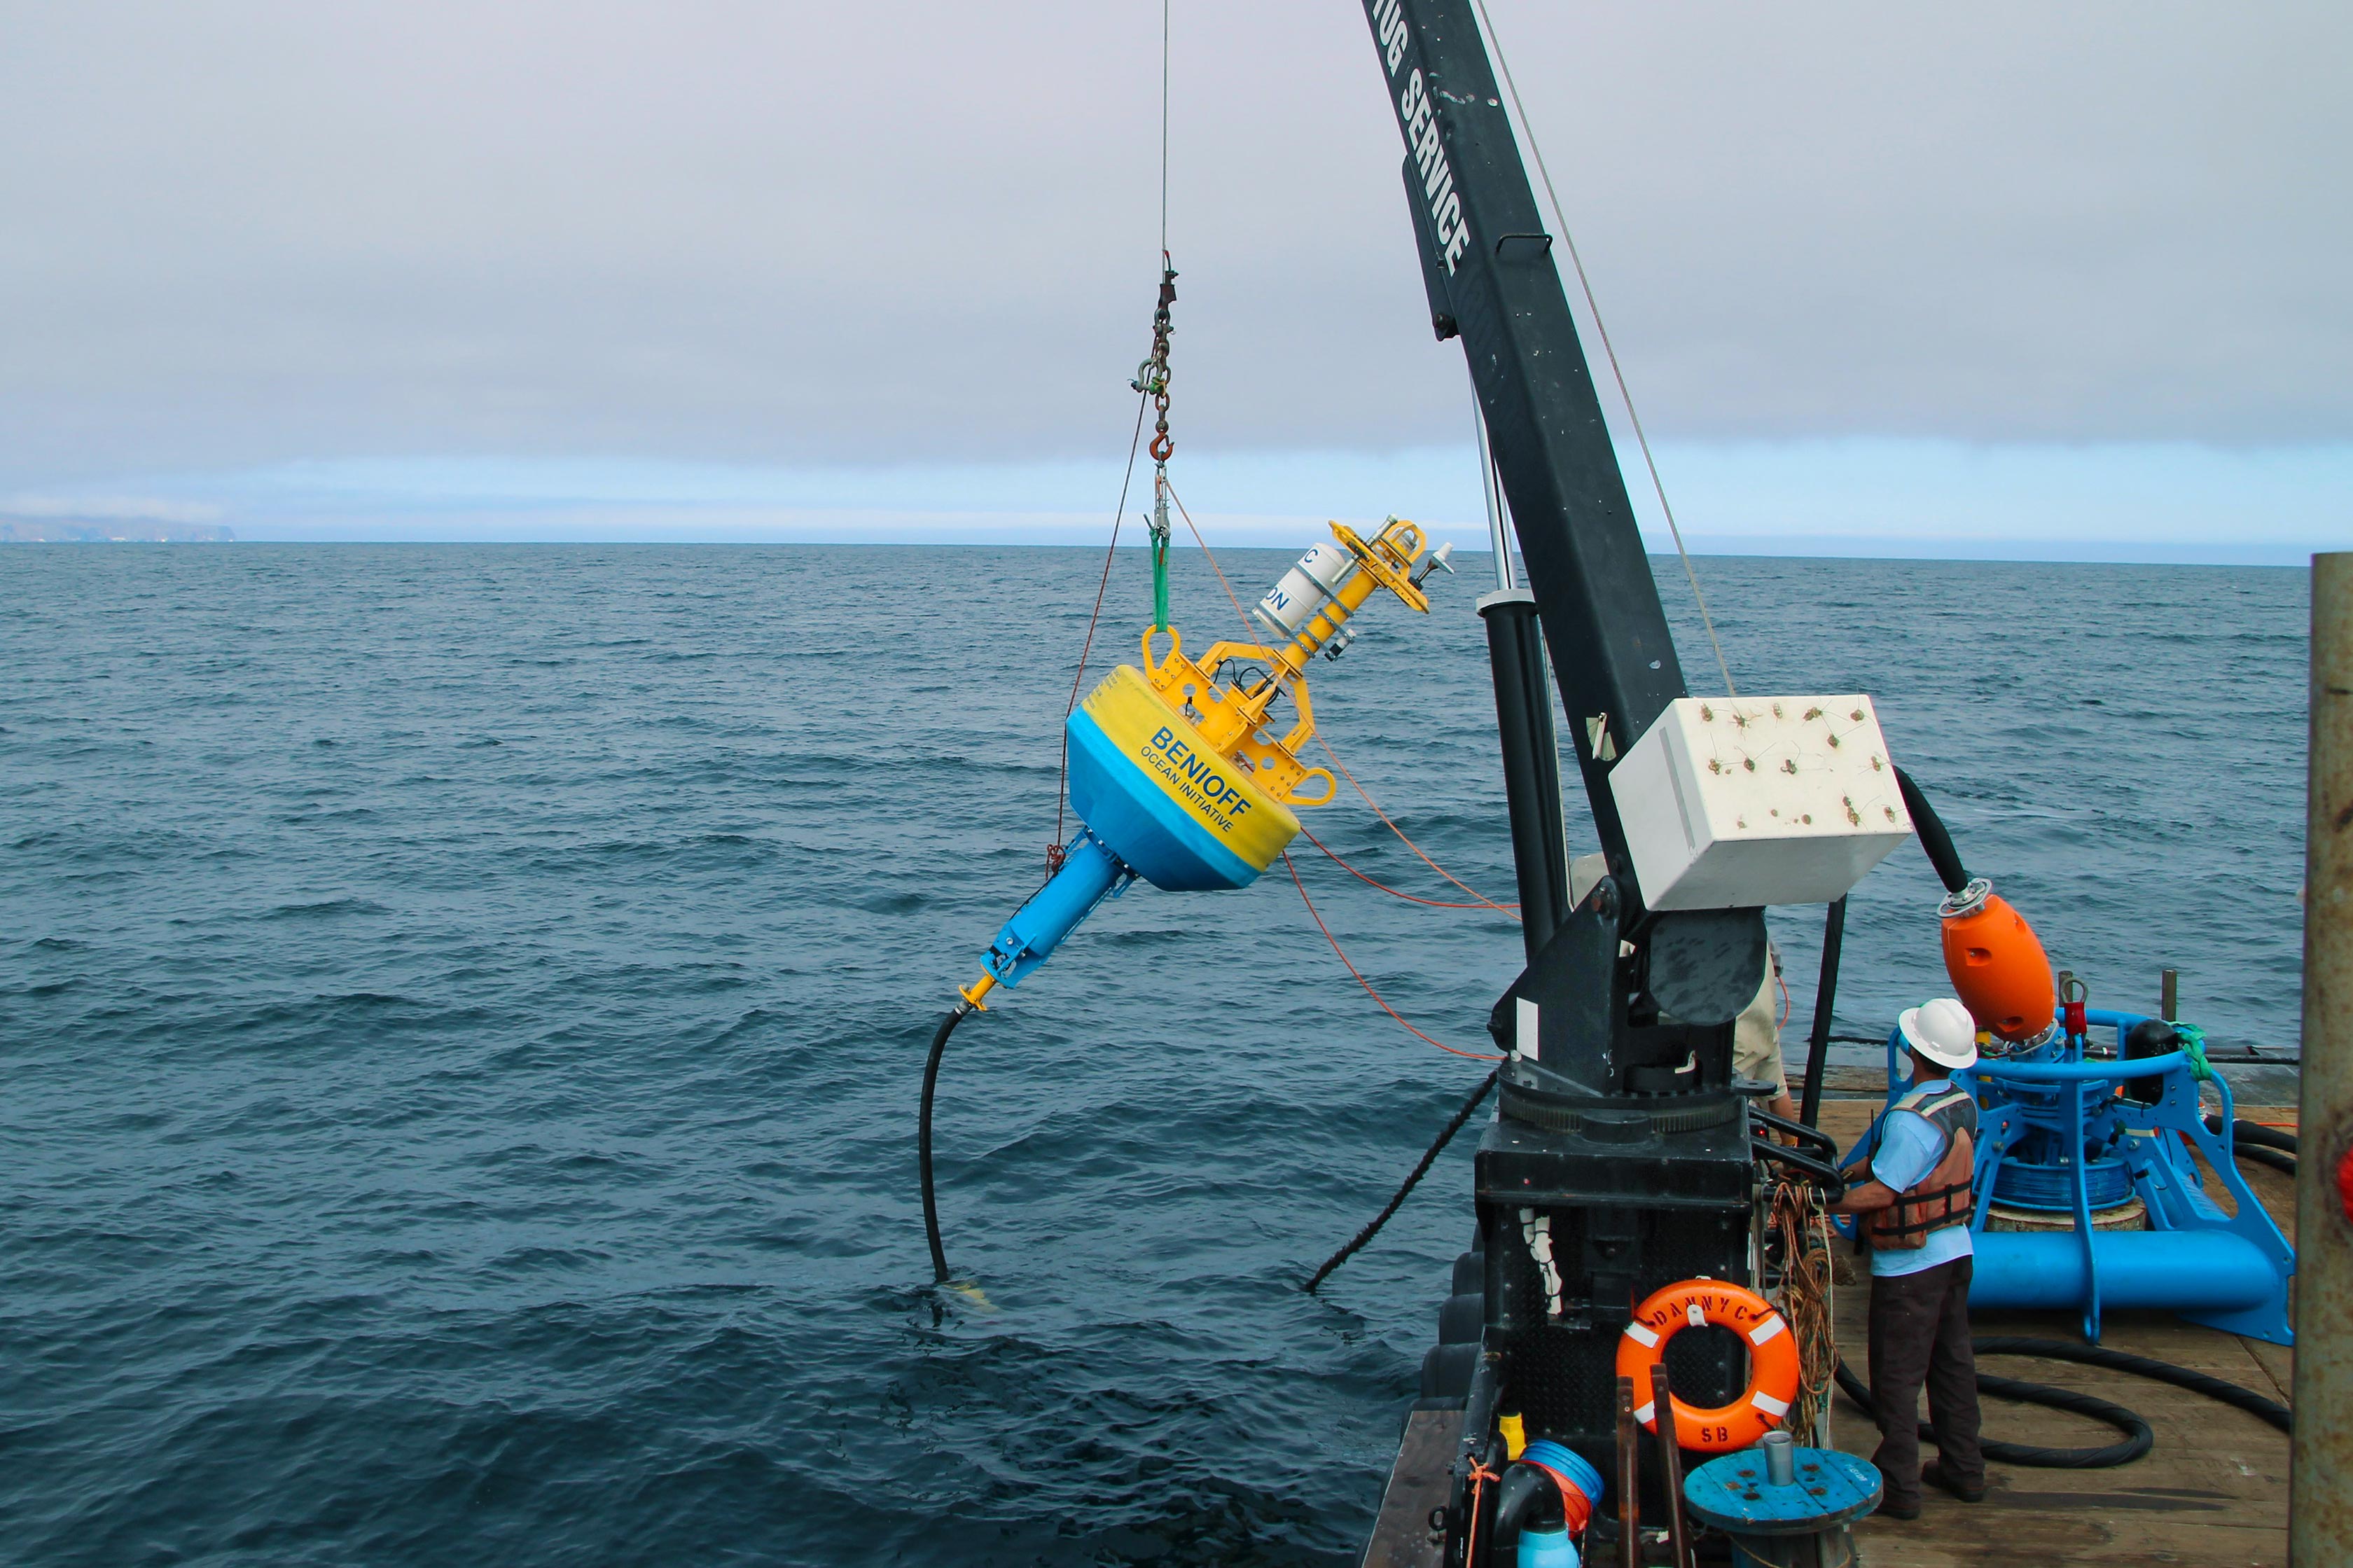 MSI Benioff Ocean Science Laboratory deploys a whale safe buoy